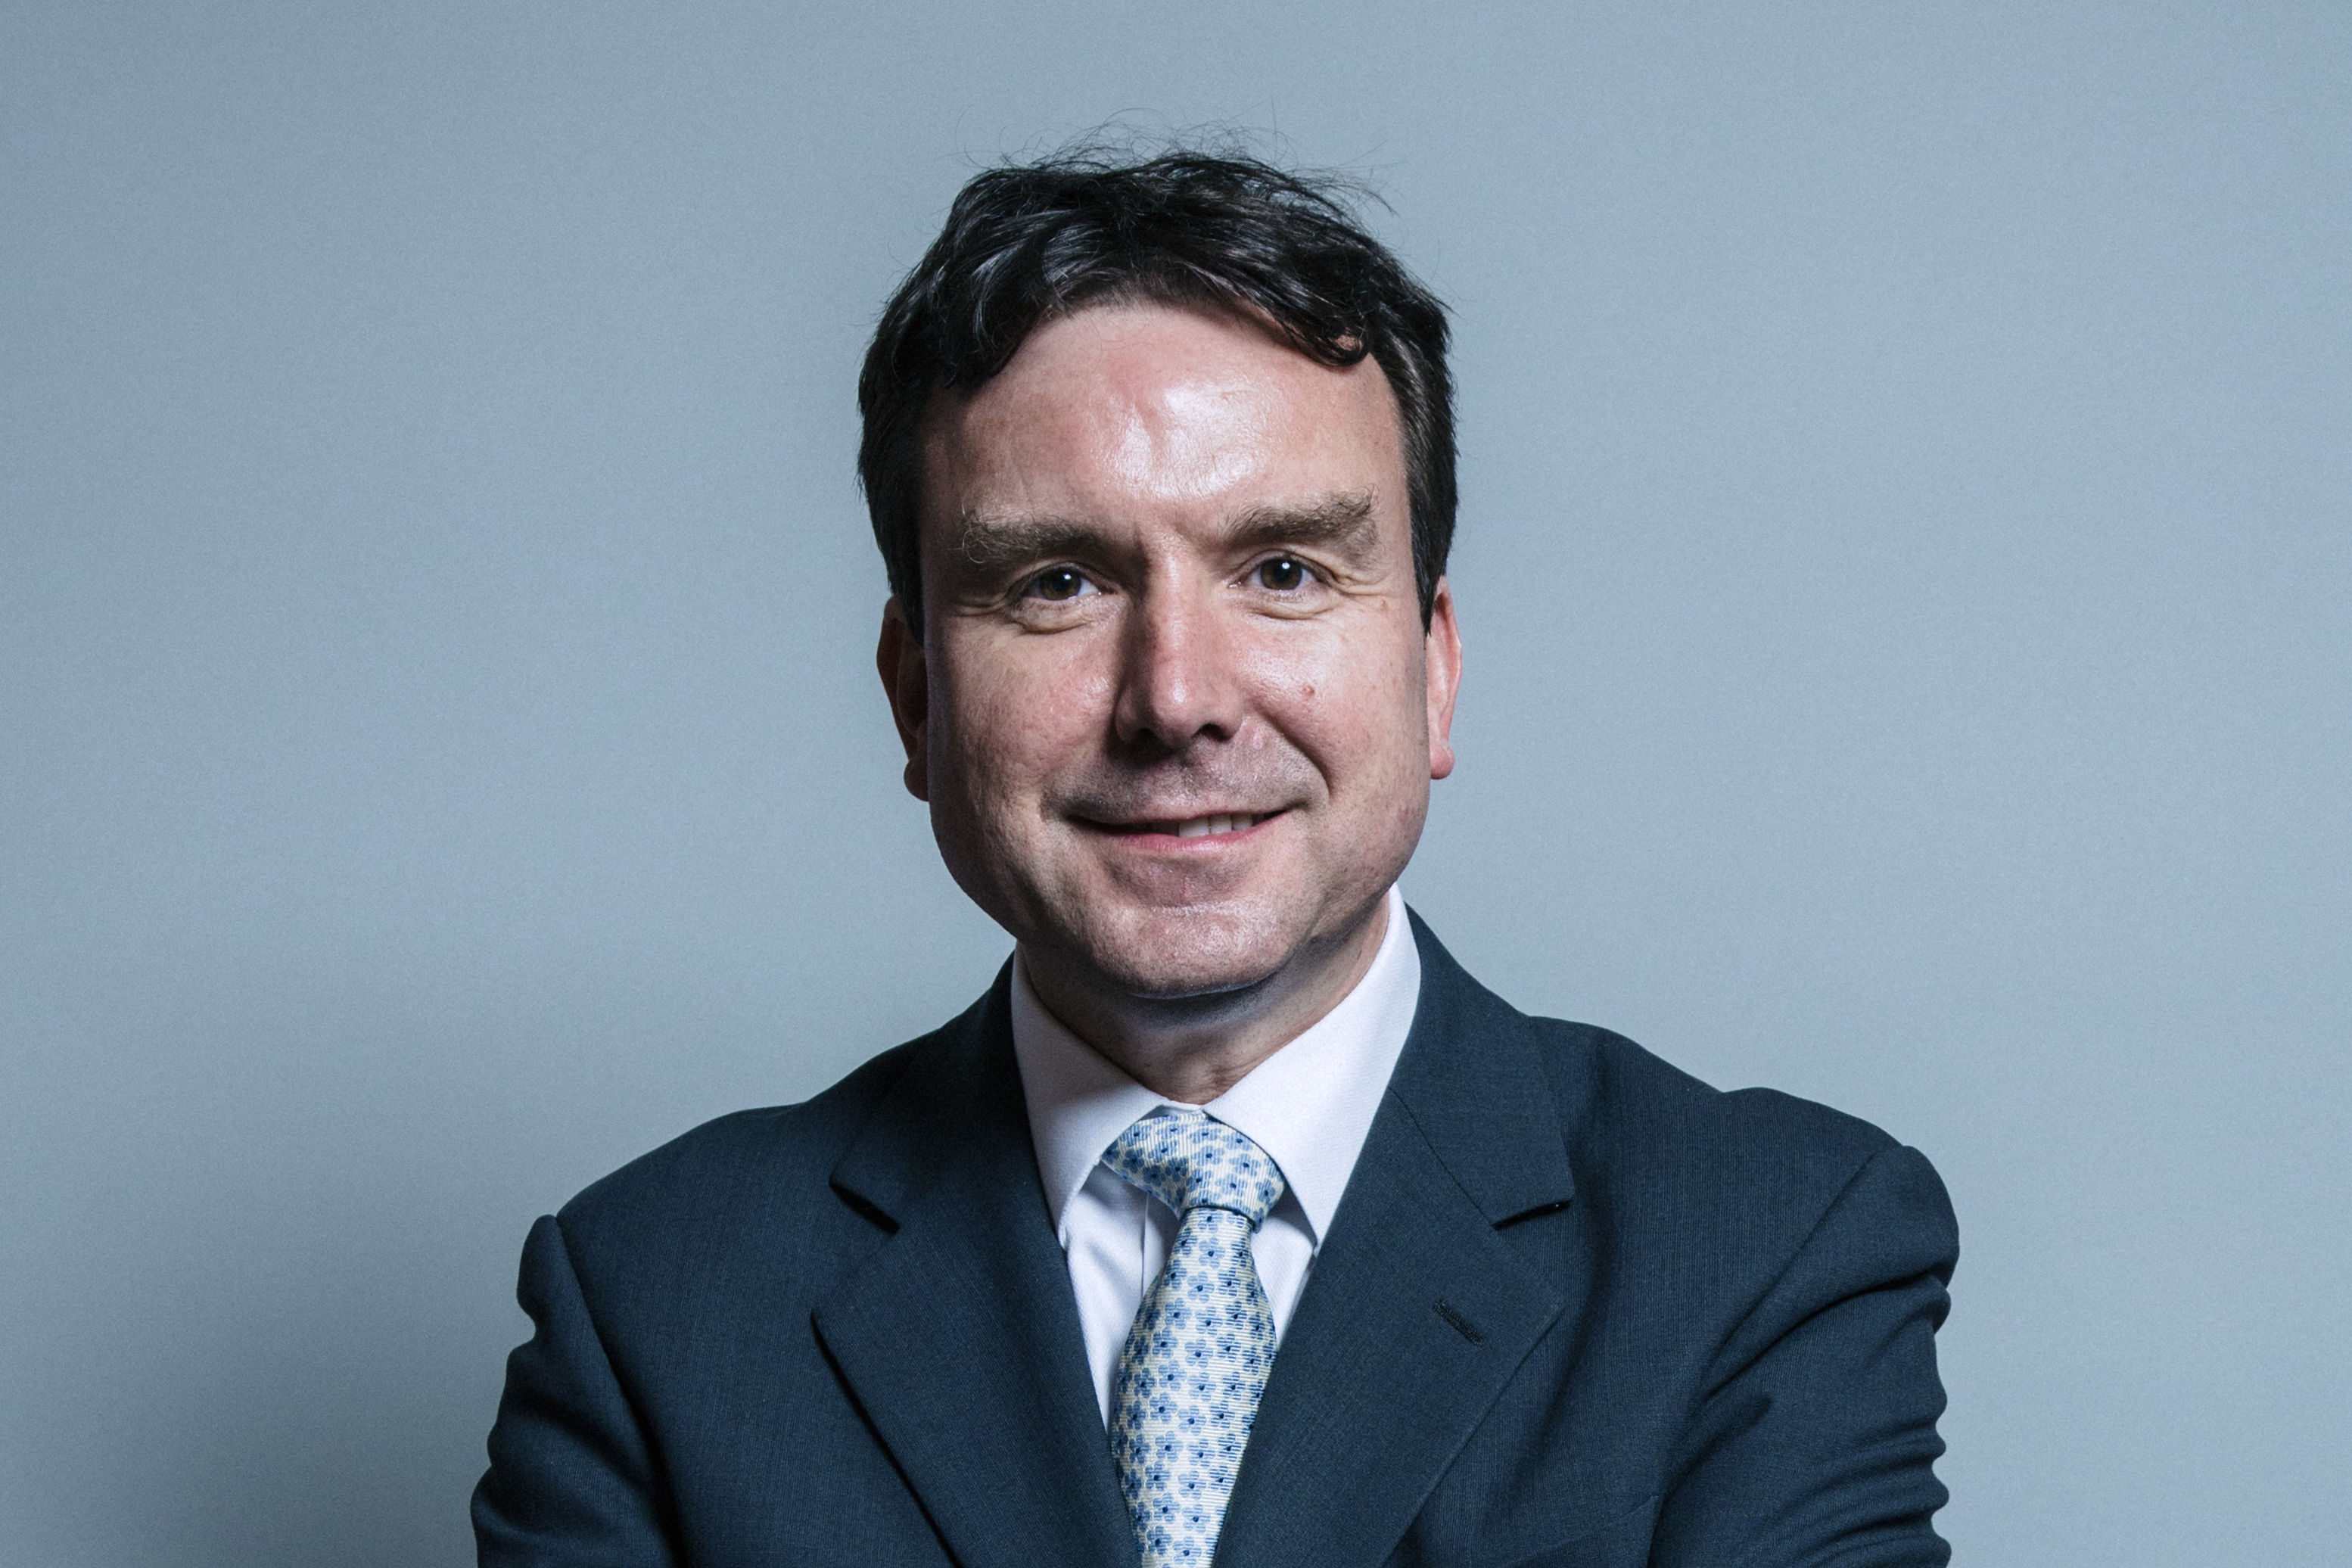 Business Minister Andrew Griffiths, who is unable to take shared parental leave despite promoting the policy (Chris McAndrew/UK Parliament/(Attribution 3.0 Unported (CC BY 3.0)/PA)